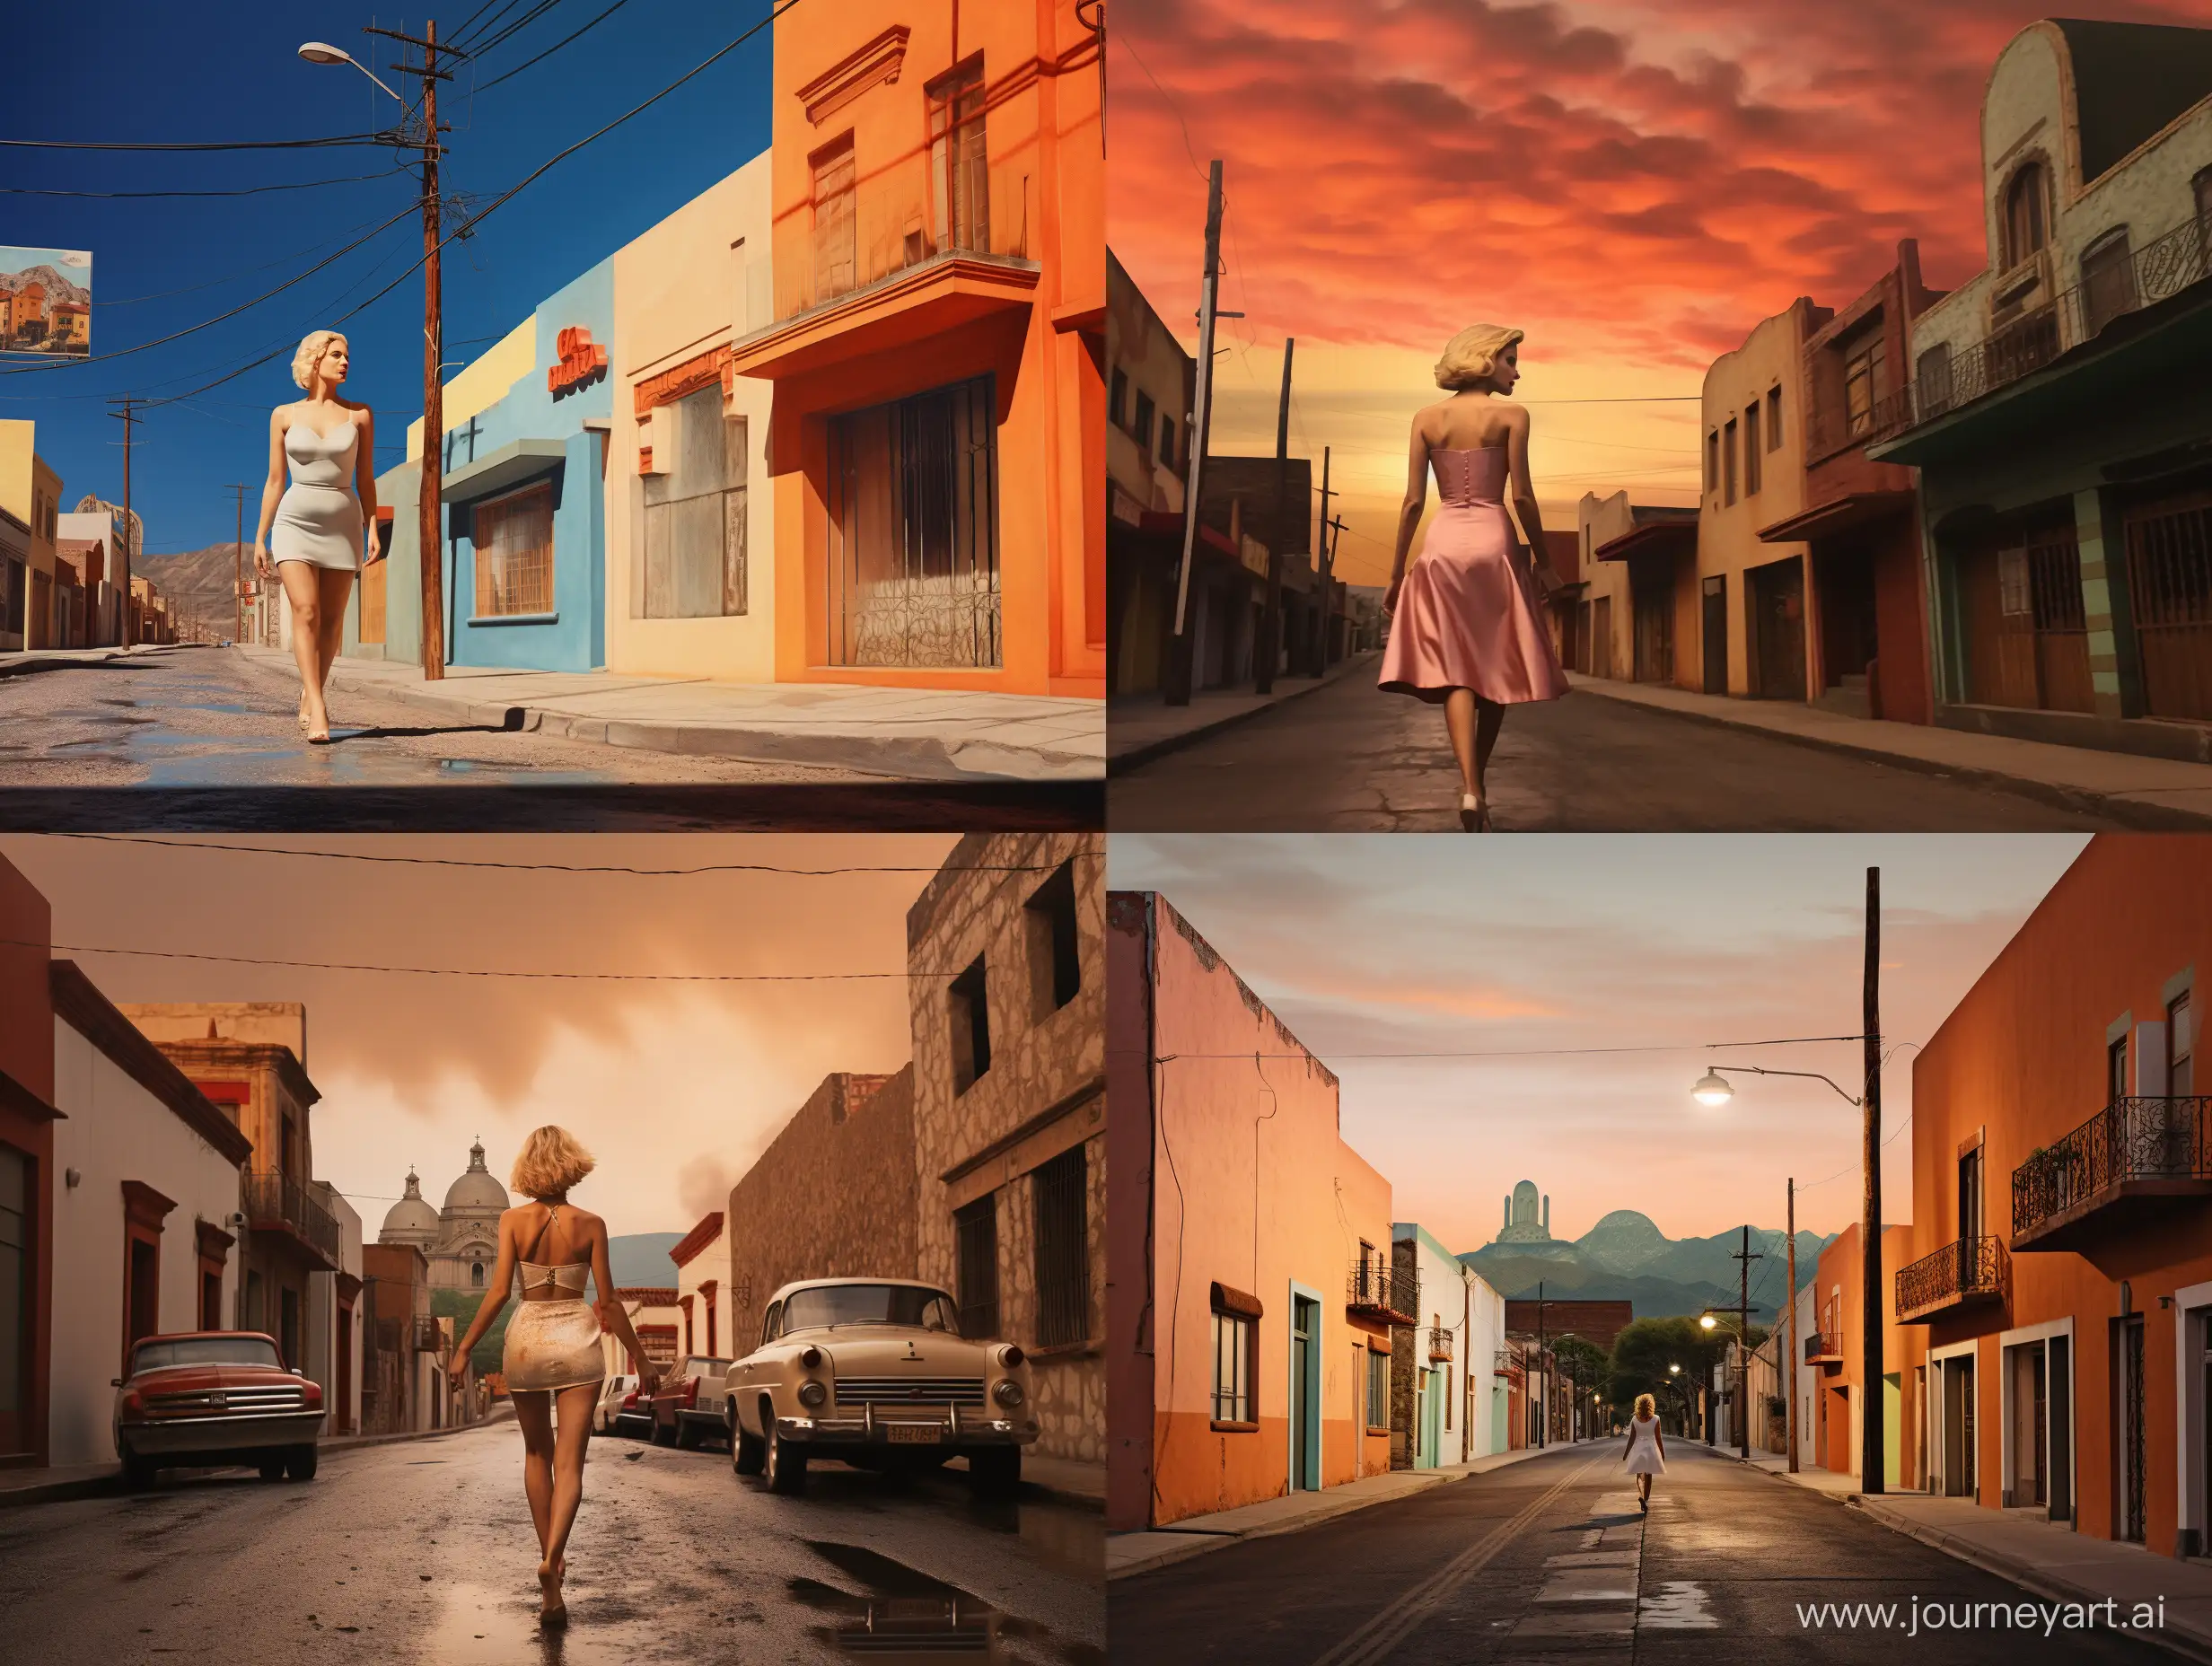 Marilyn-Monroe-Strolling-the-Historic-Streets-of-Queretaro-at-Dawn